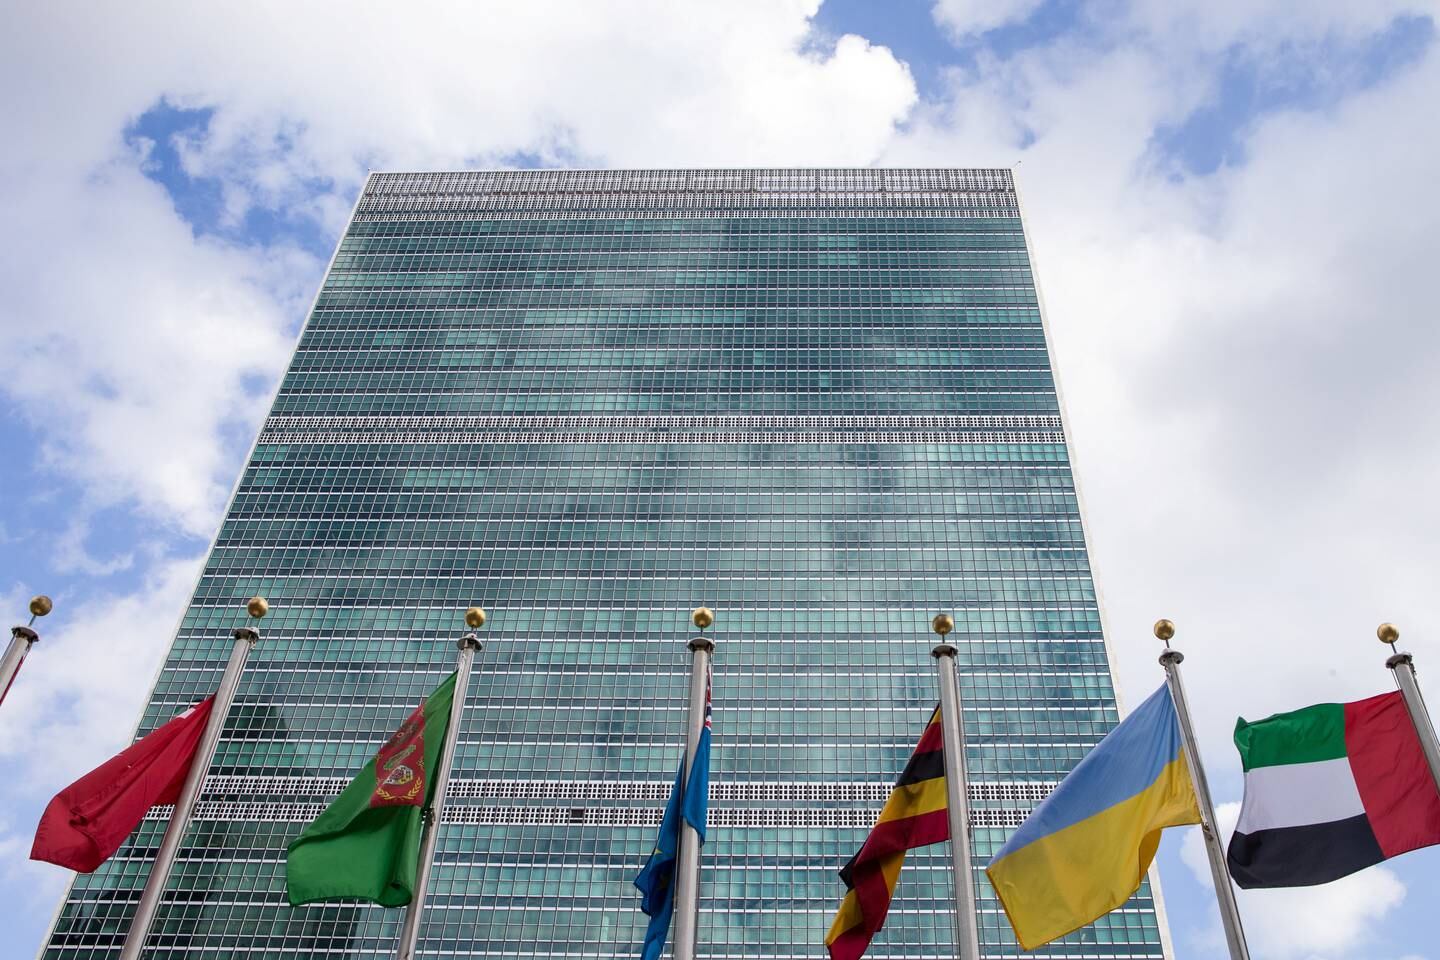 The United Nations Building in New York on Saturday, September 16, 2017. On Tuesday the 72nd Regular Session the UN General Assembly will convene, bringing extra security measures in place. In addition to street closures around UN Headquarters and Trump Tower the NYPD is on heightened awareness and will have a significant presence in light of Friday's detonation of an improvised explosive device on a London Tube.